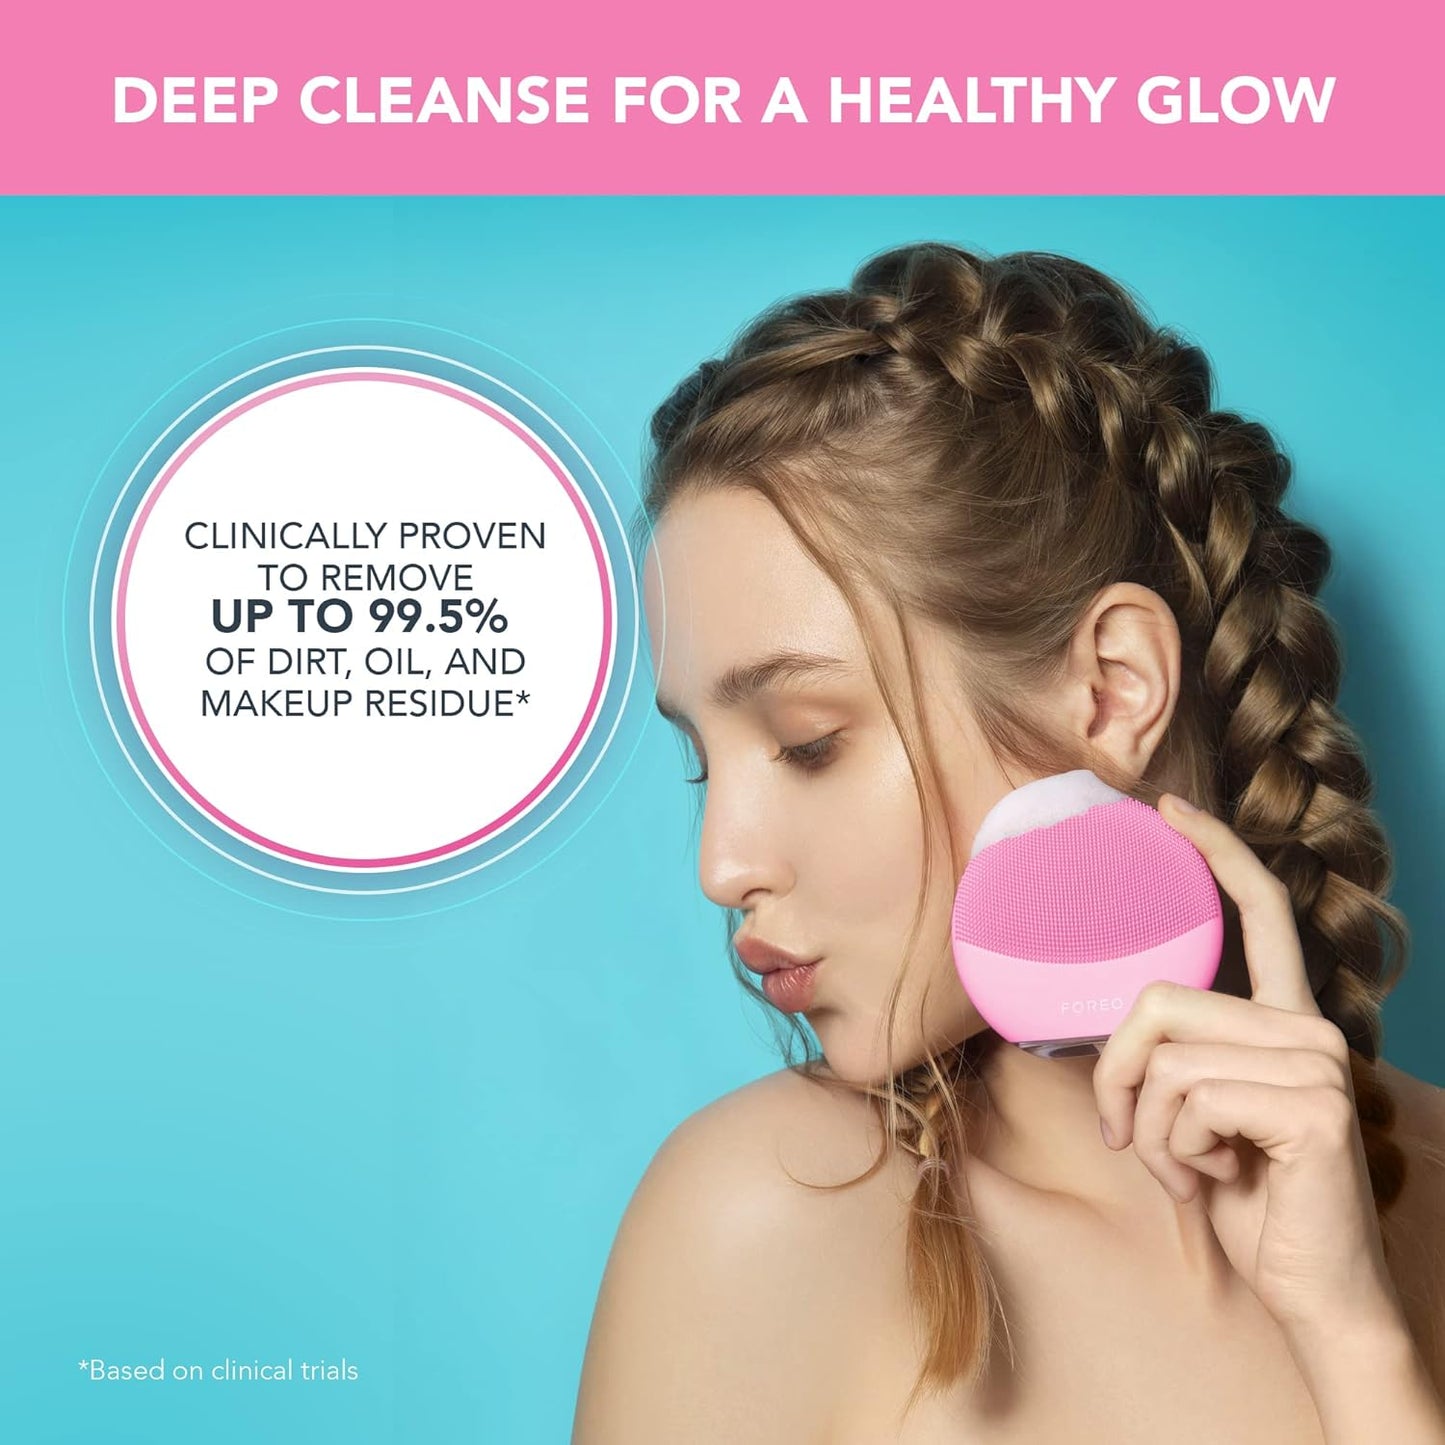 Foreo Luna Mini 3 Facial Cleansing Brush - Travel Accessories - Face Massager Electric, Ultra-Hygienic Silicone - Simple Face Wash - Electric Face Cleanser - App-Connected - Pearl Pink